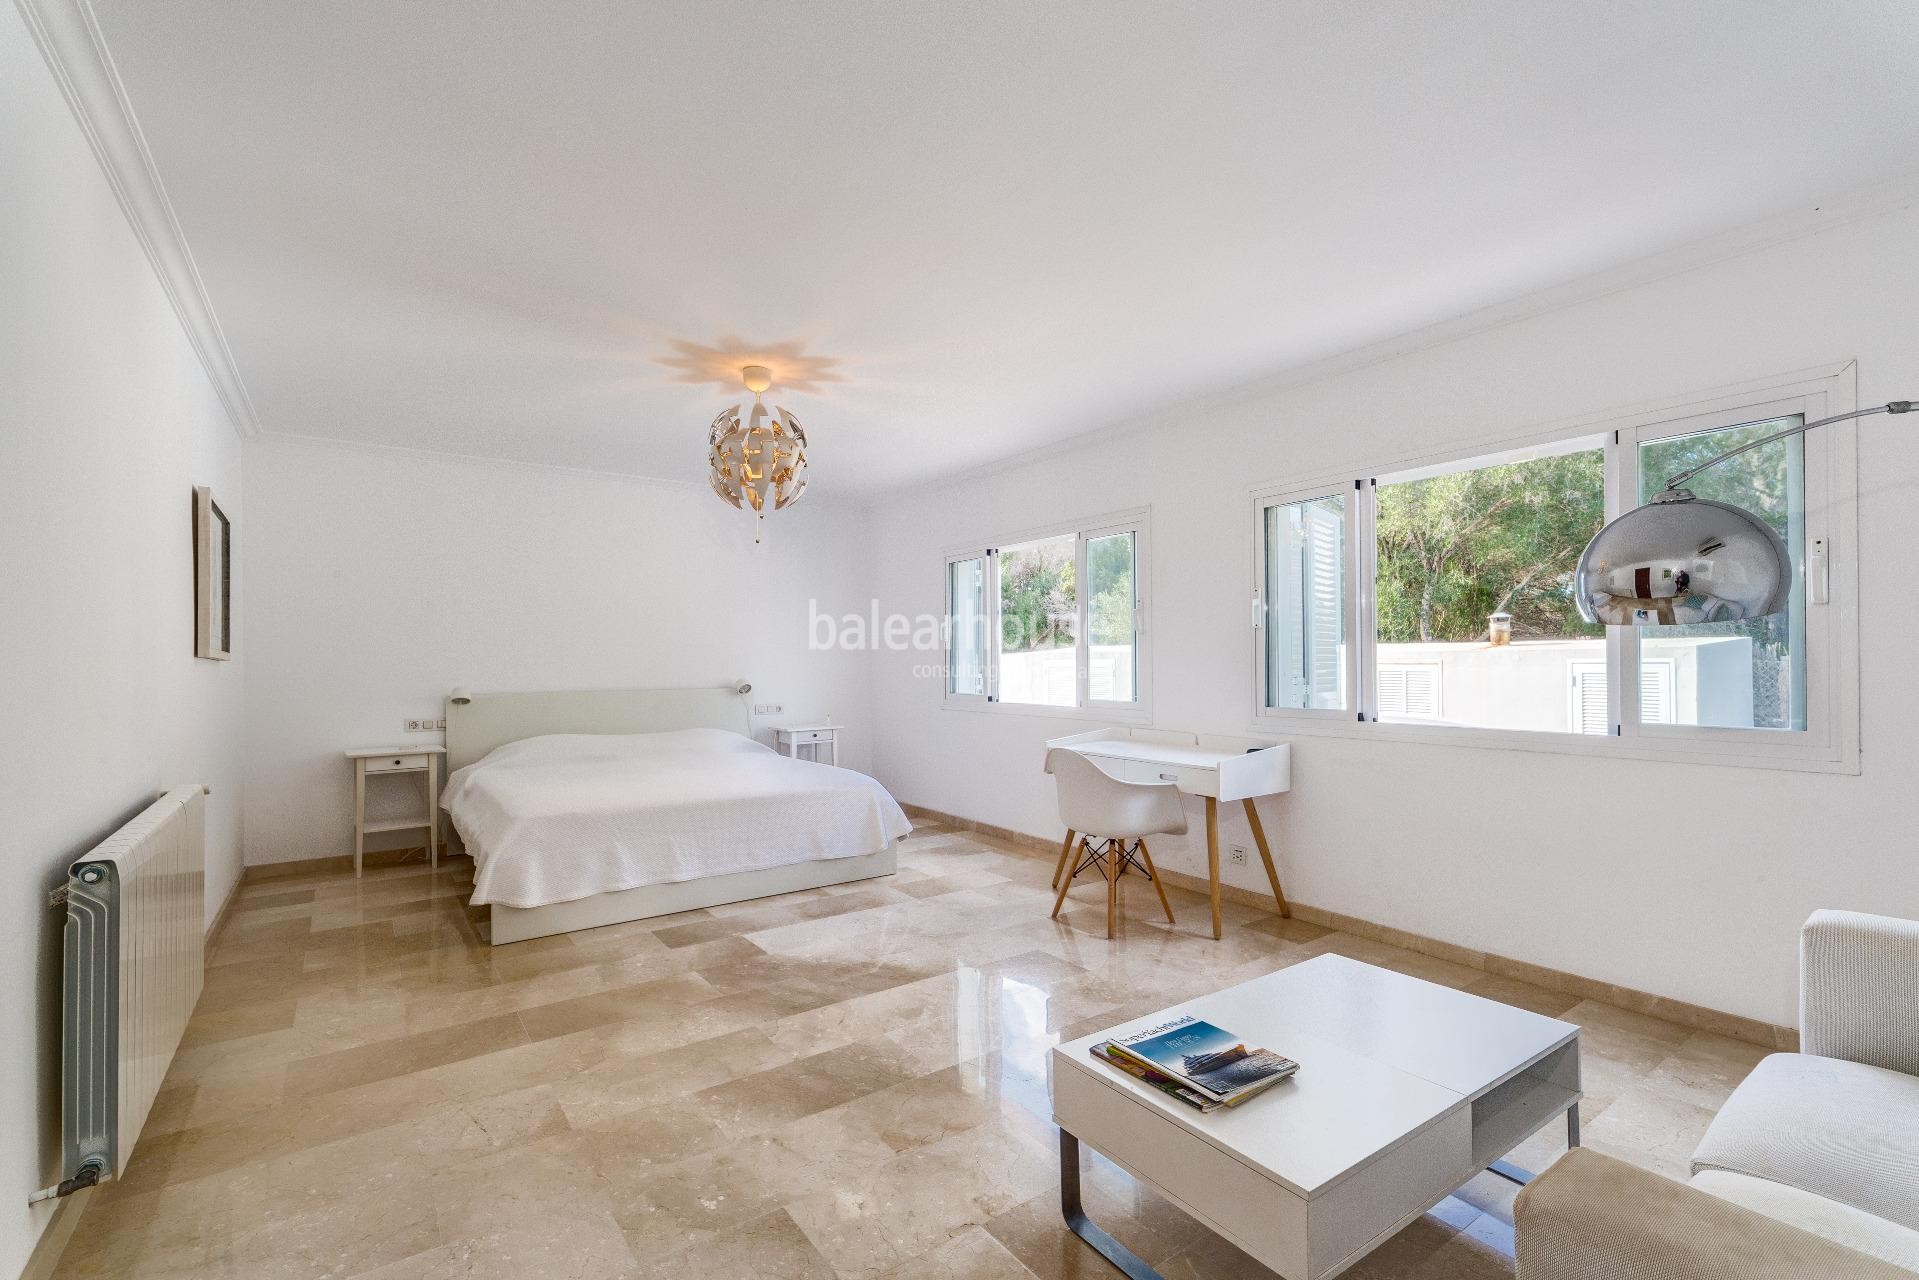 Mediterranean style villa just a few minutes from the sea in Puerto Pollensa